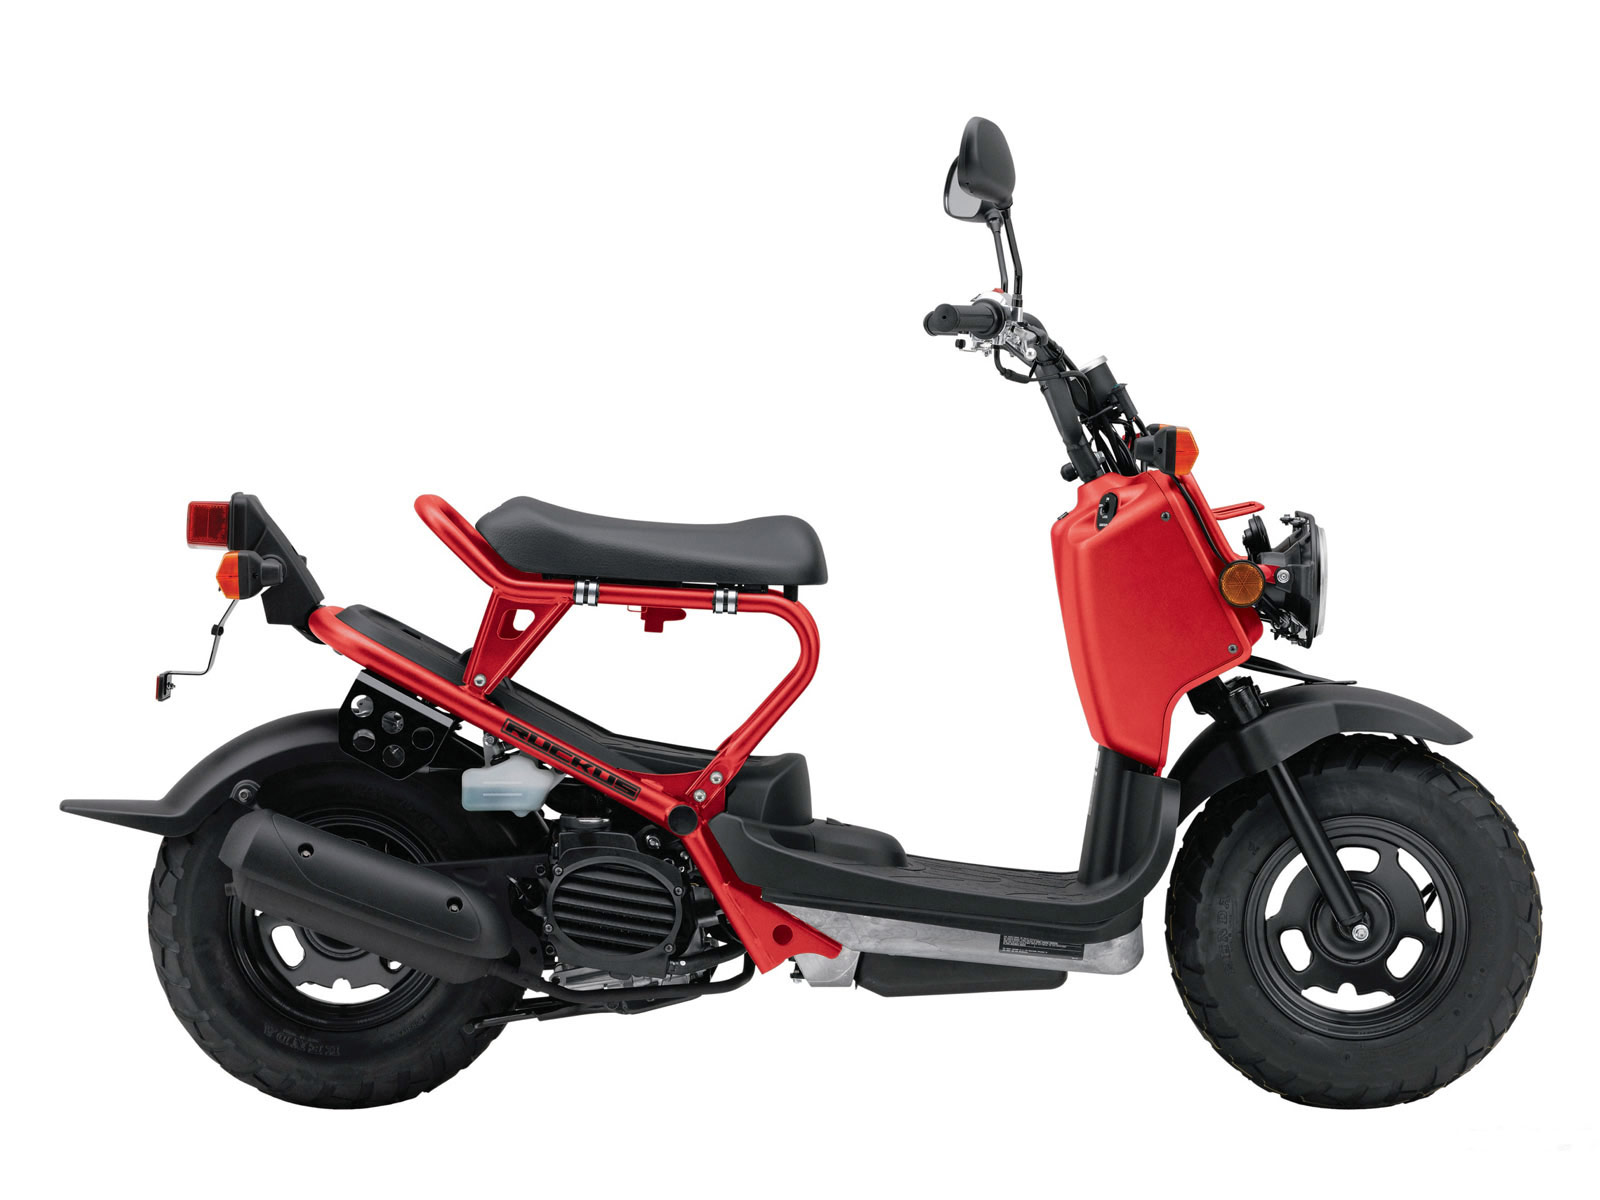 Honda Ruckus Scooter Wallpaper Accident Lawyers Info